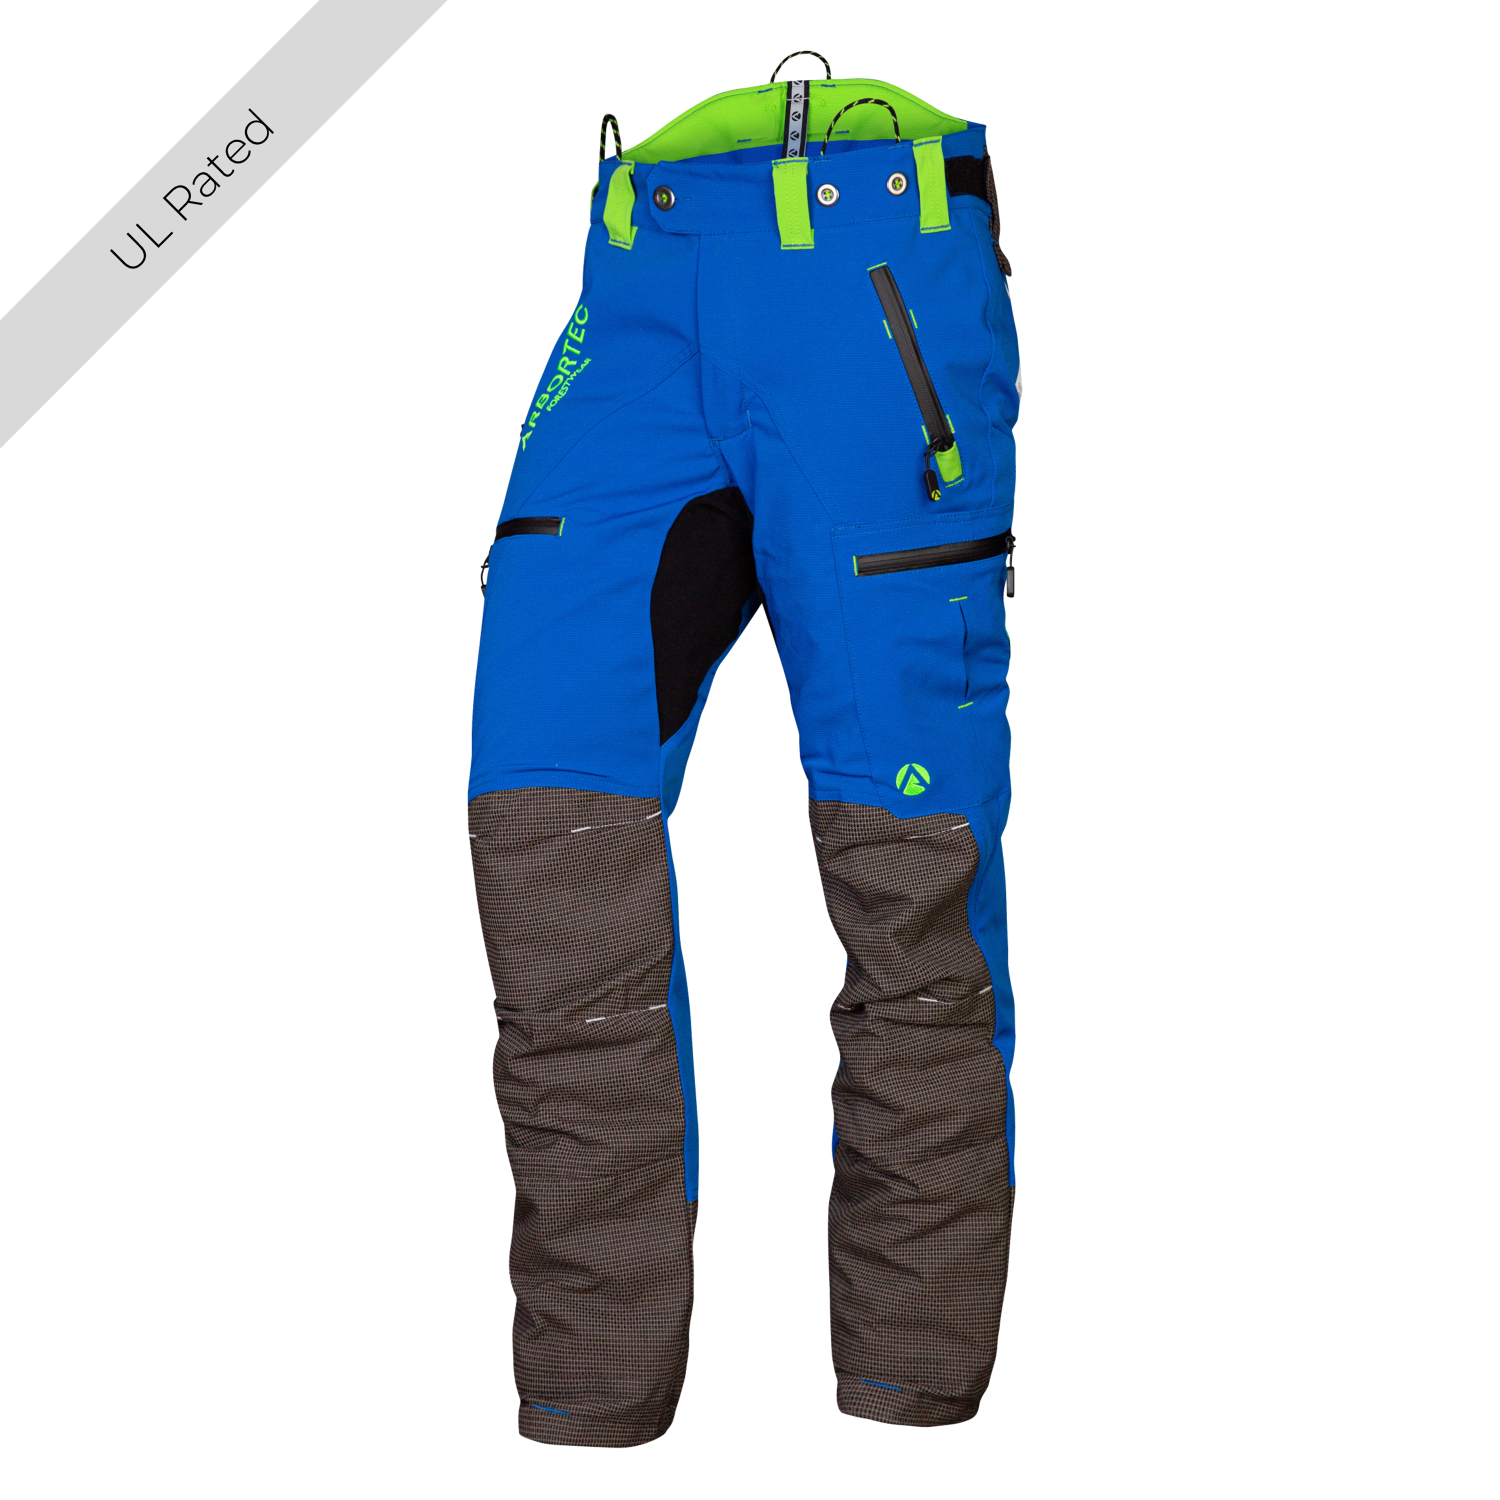 AT4060(US) Breatheflex Pro Chainsaw Trousers UL Rated - Blue